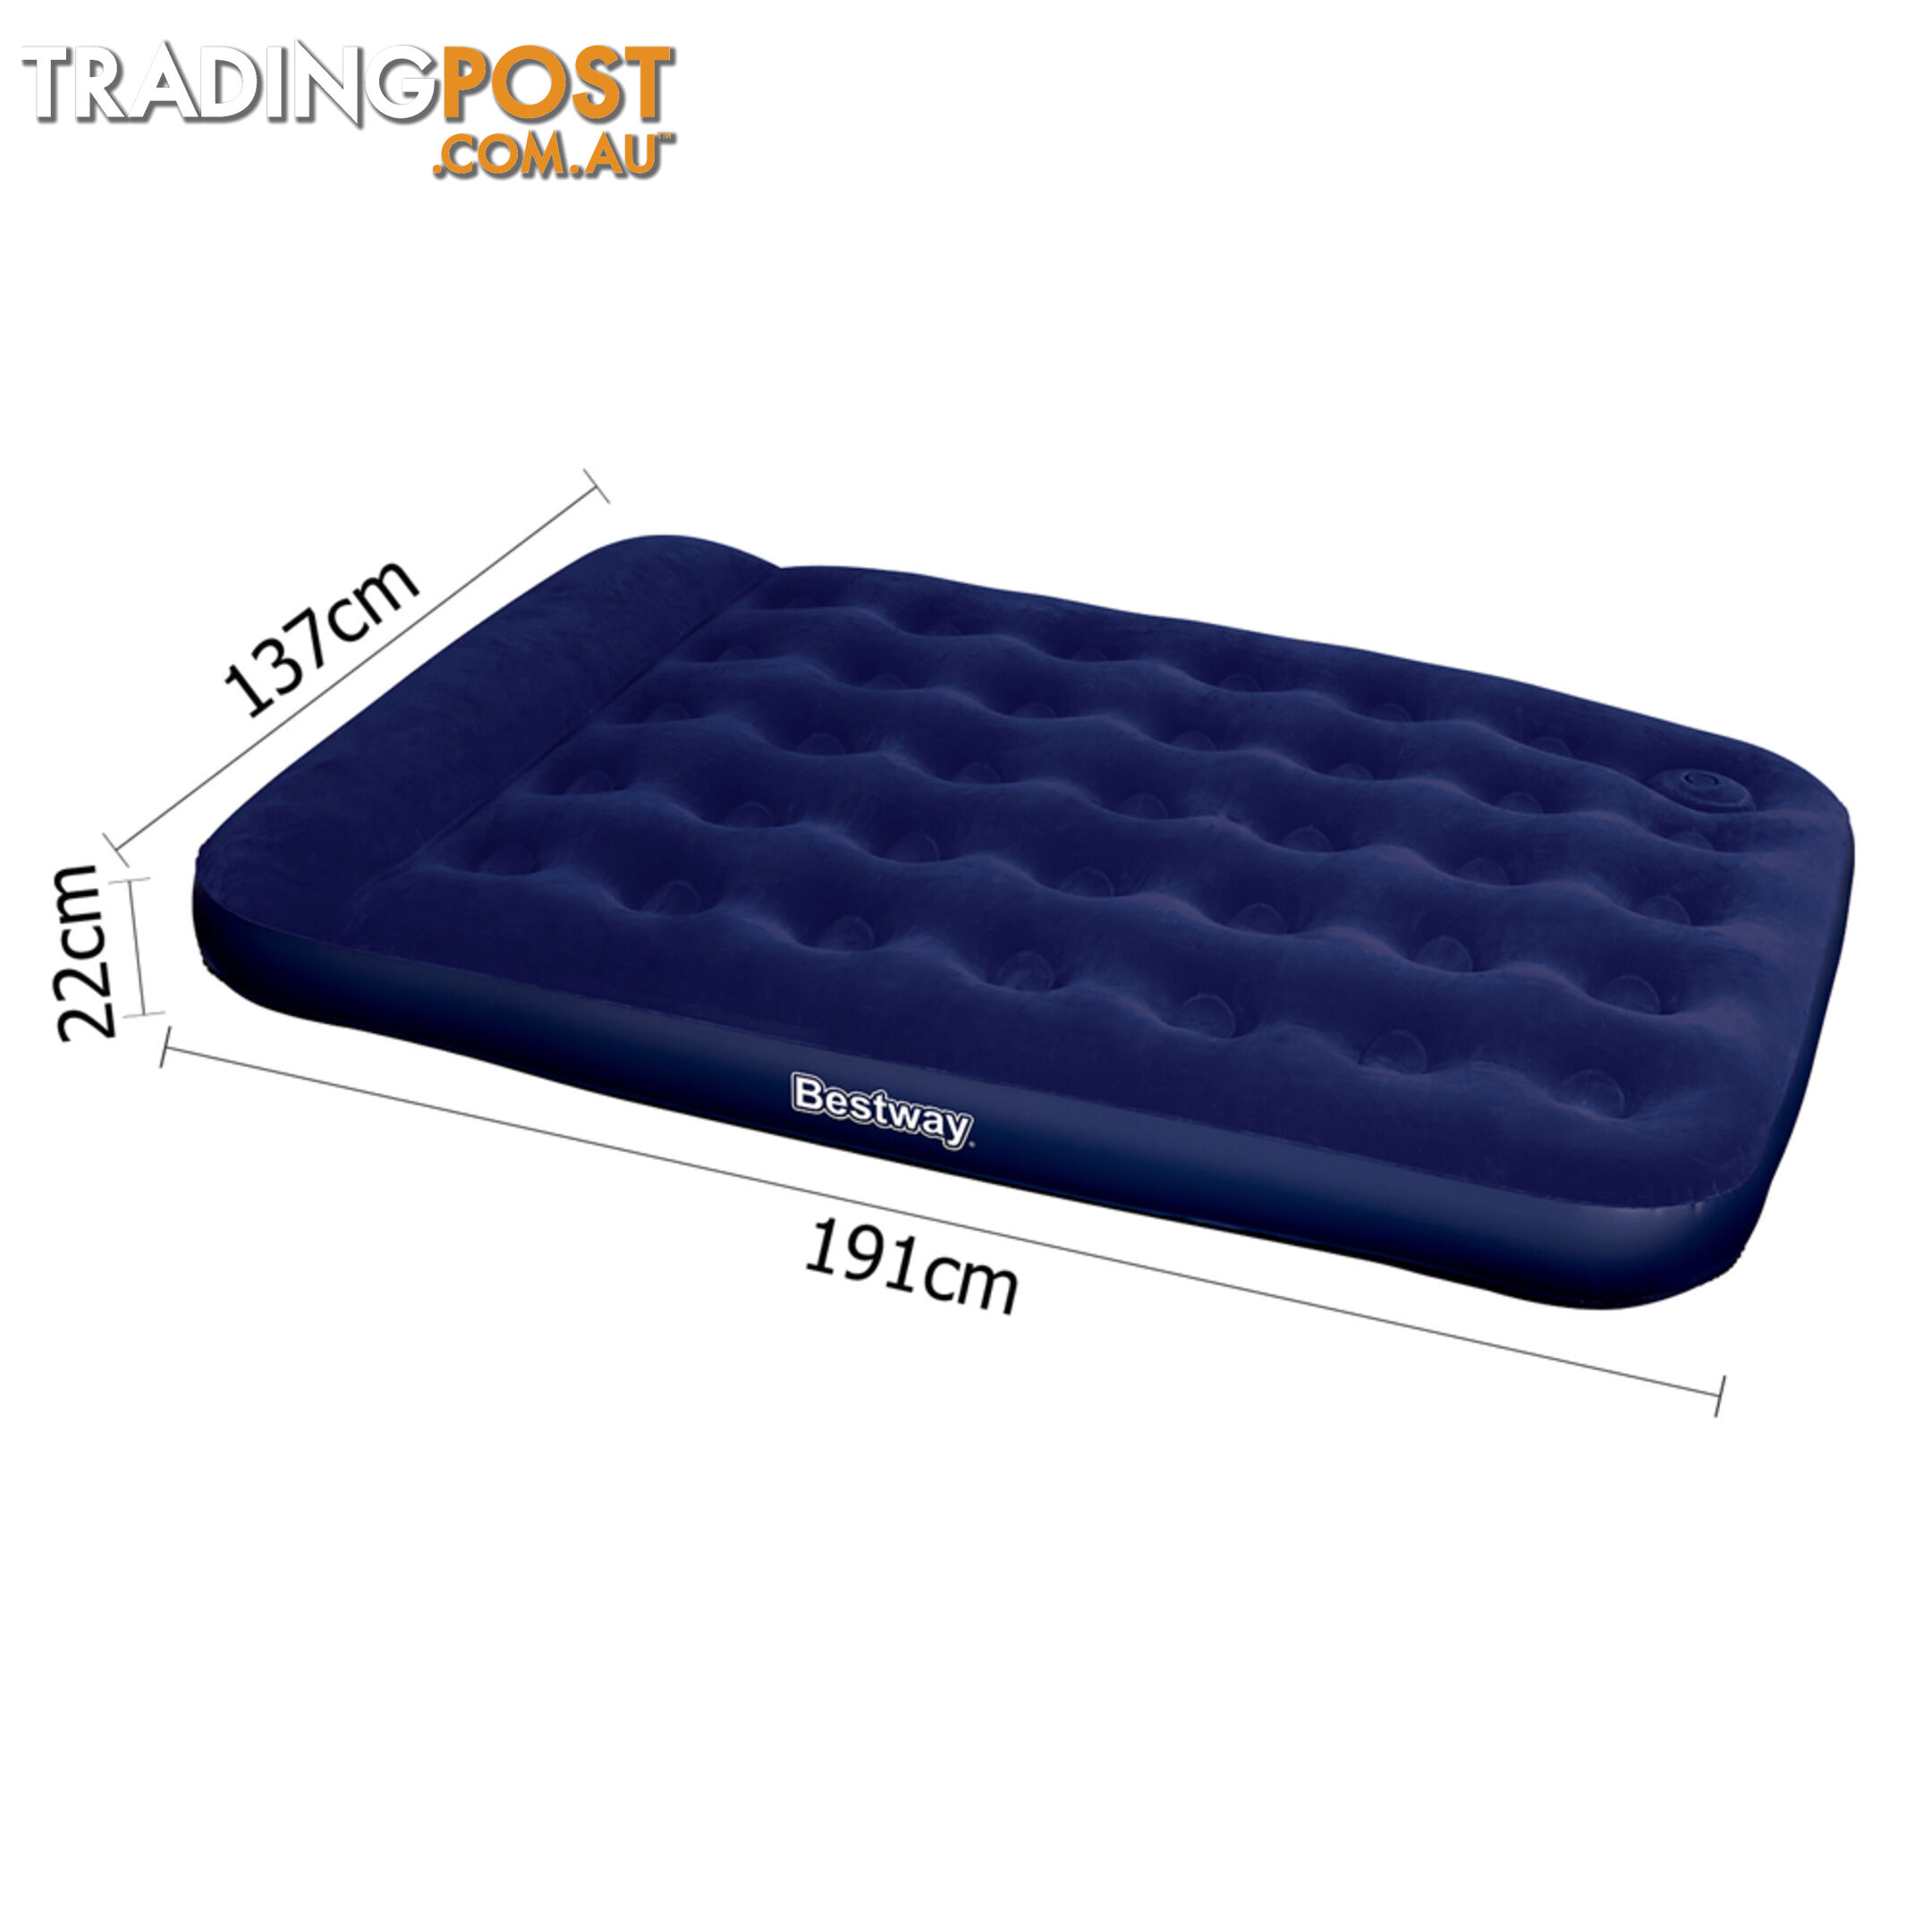 Bestway Double Inflatable Air Mattress Bed w/ Built-in Foot Pump Blue